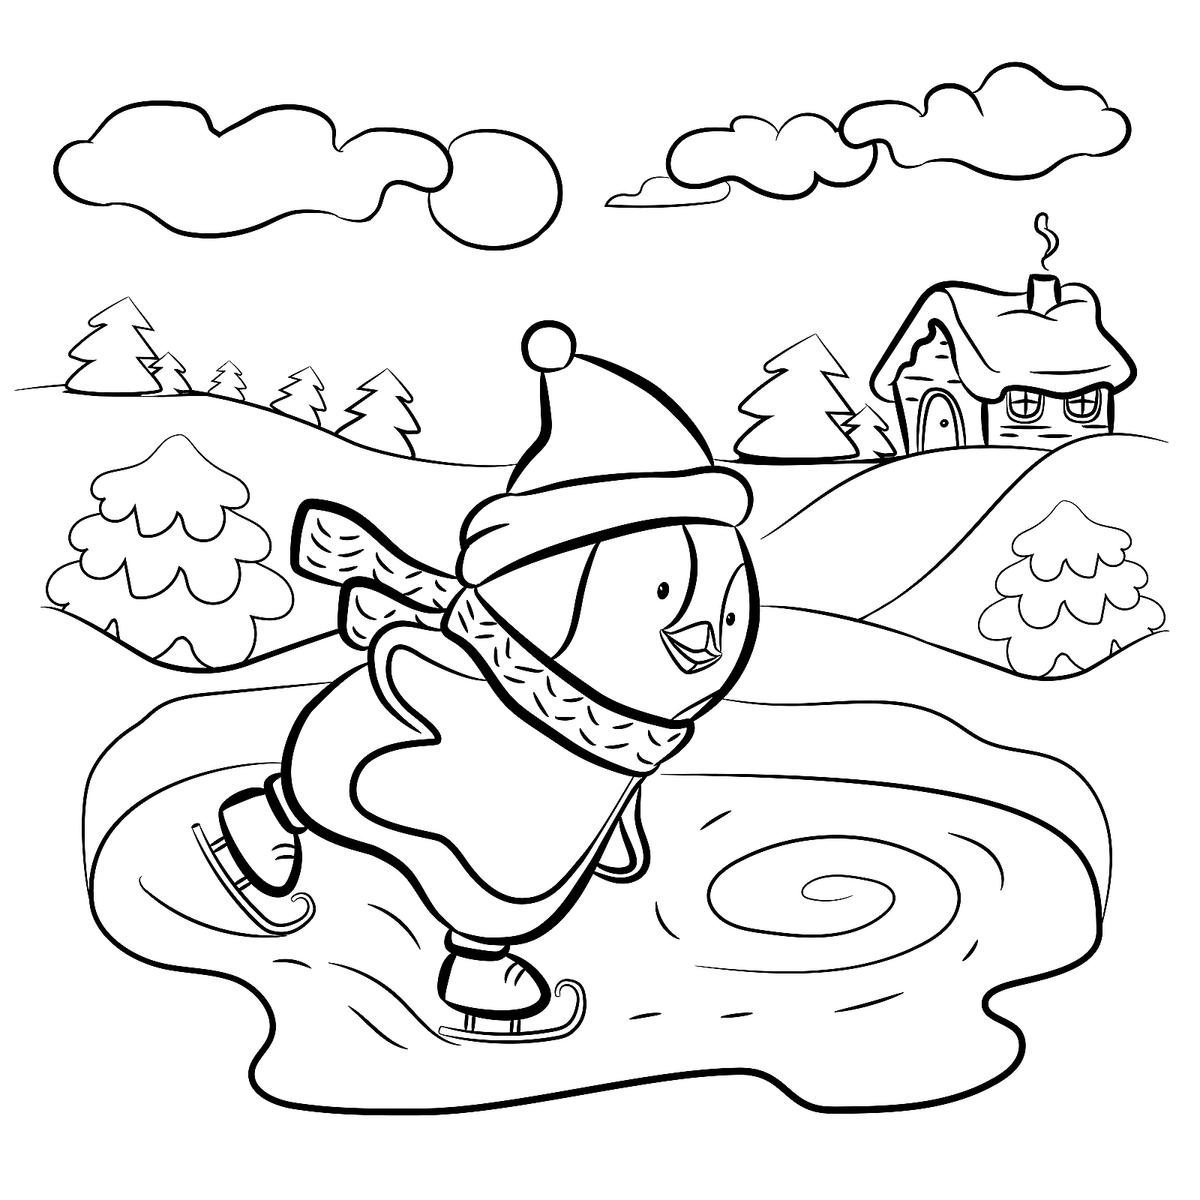 Winter coloring puzzle pages free printable winter